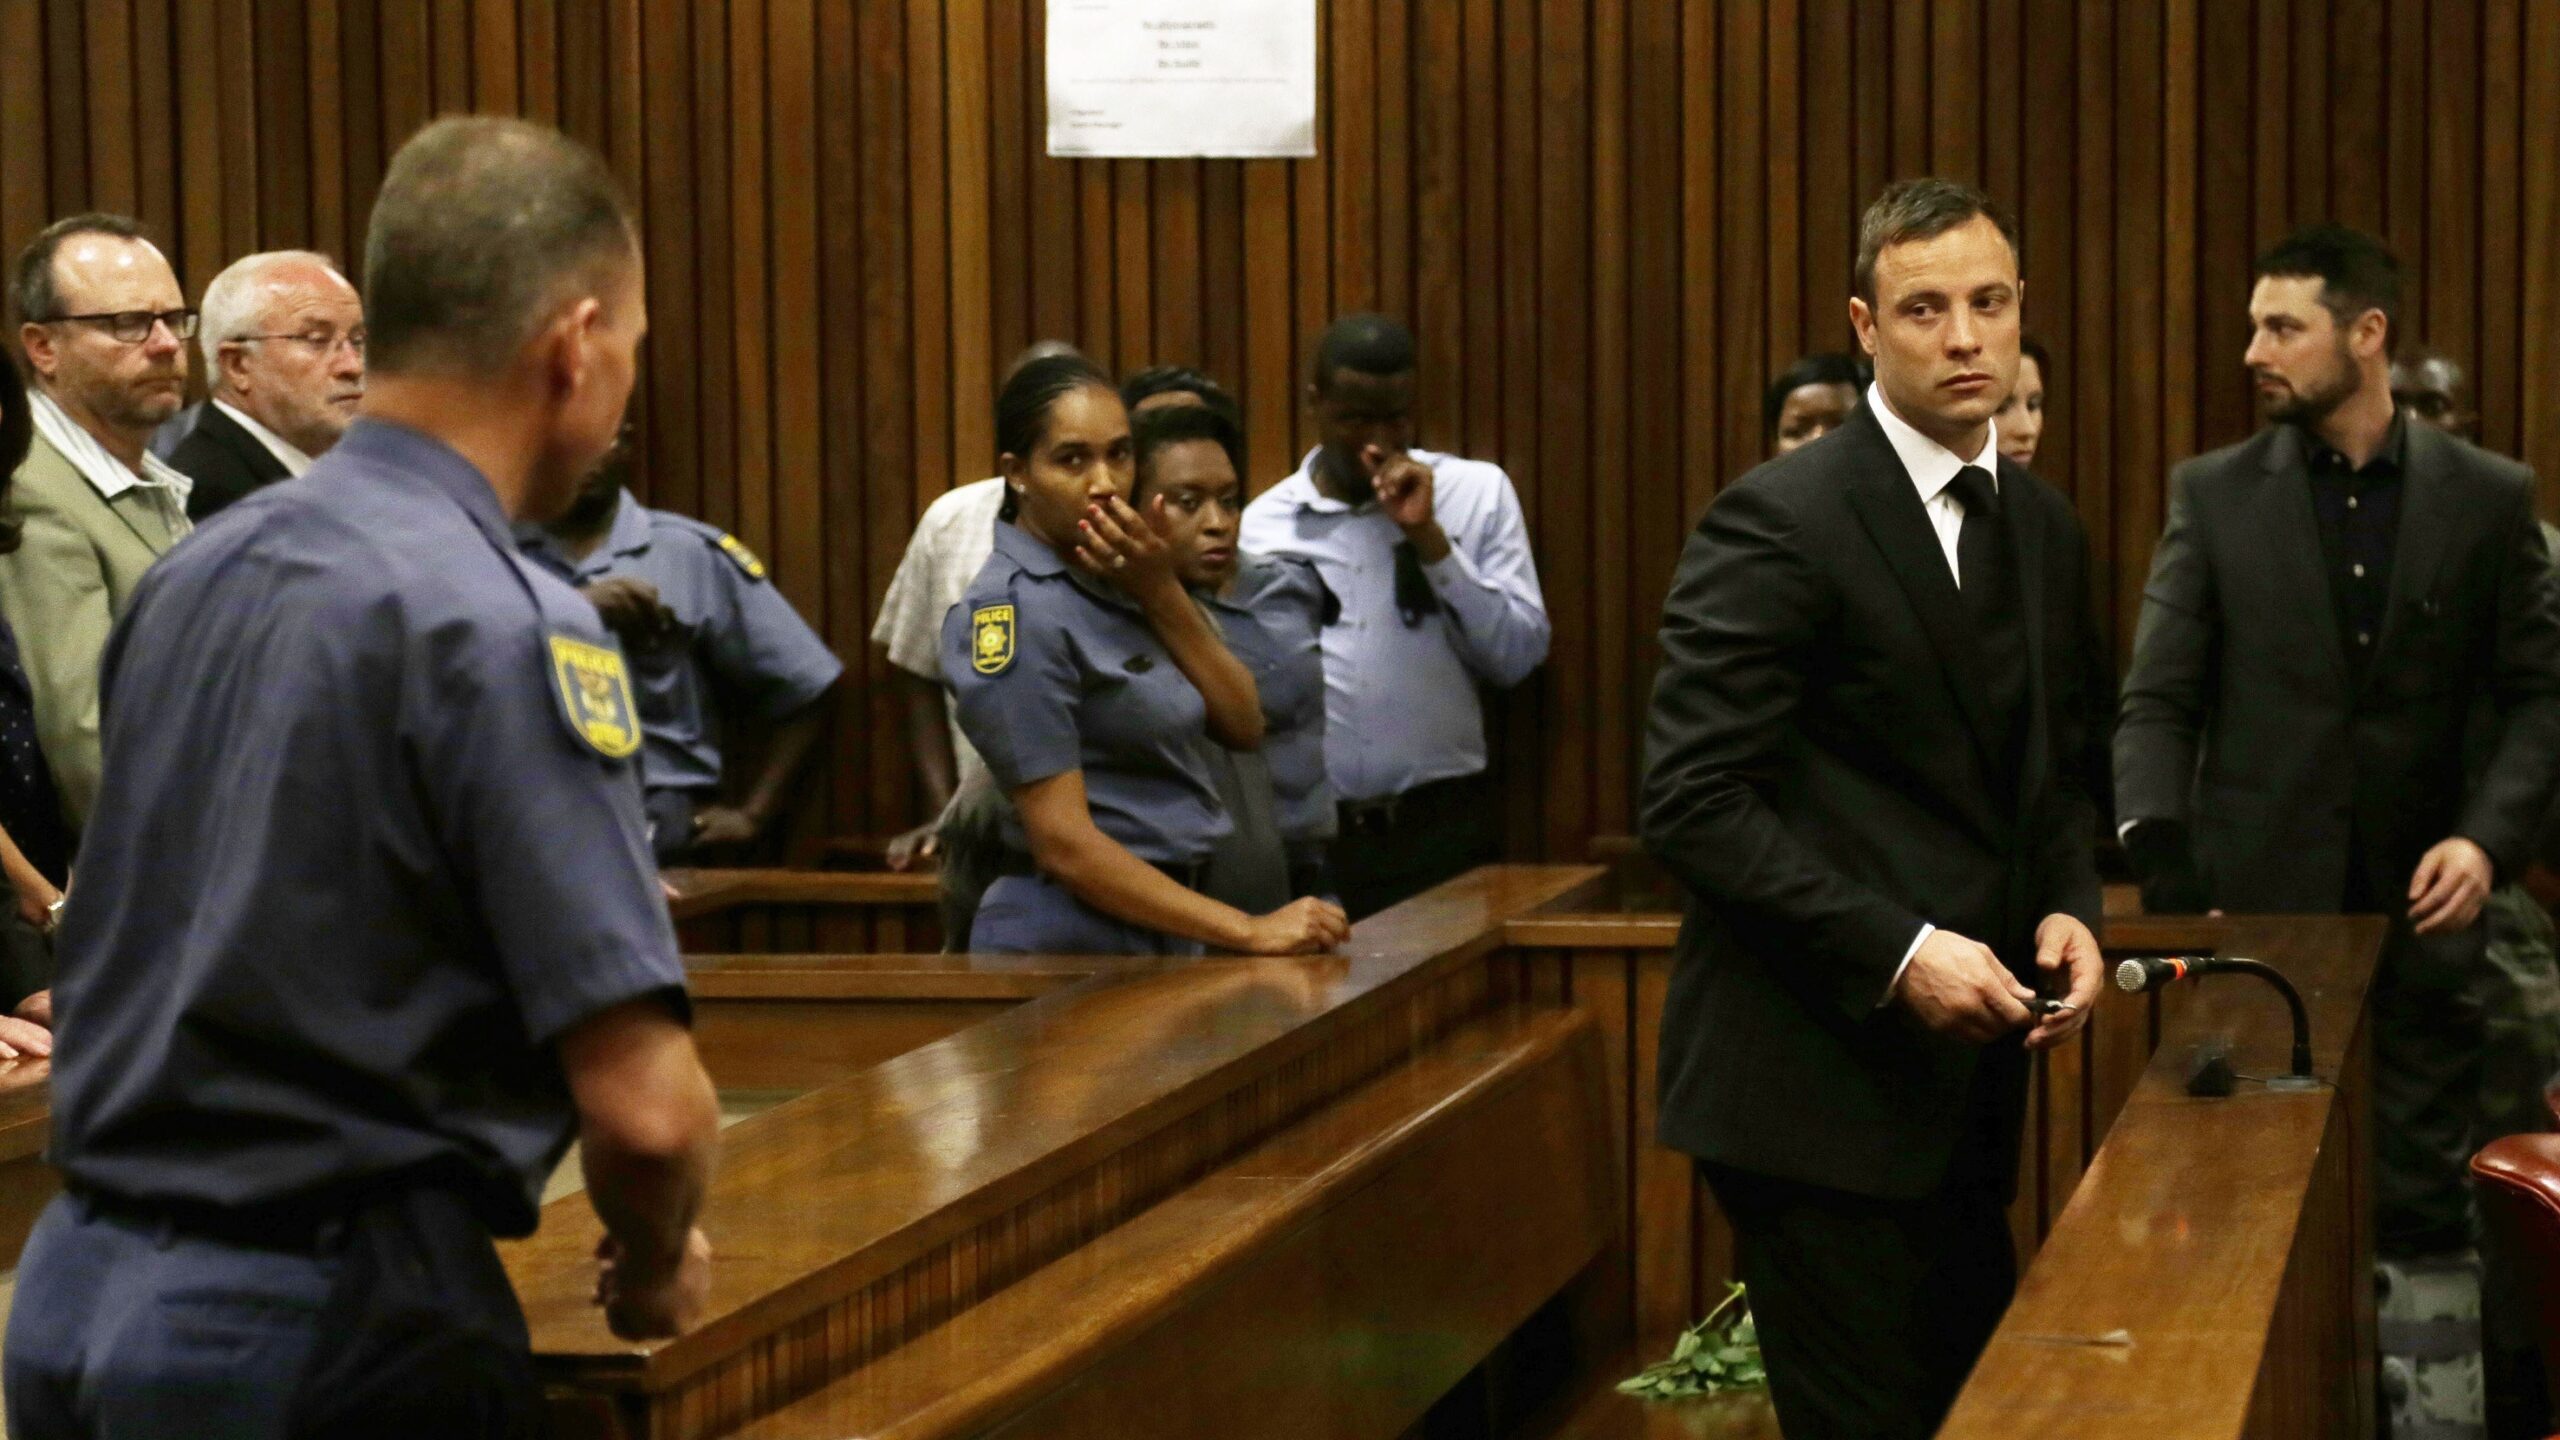 2014 Oscar Pistorius Convicted for 5 Years